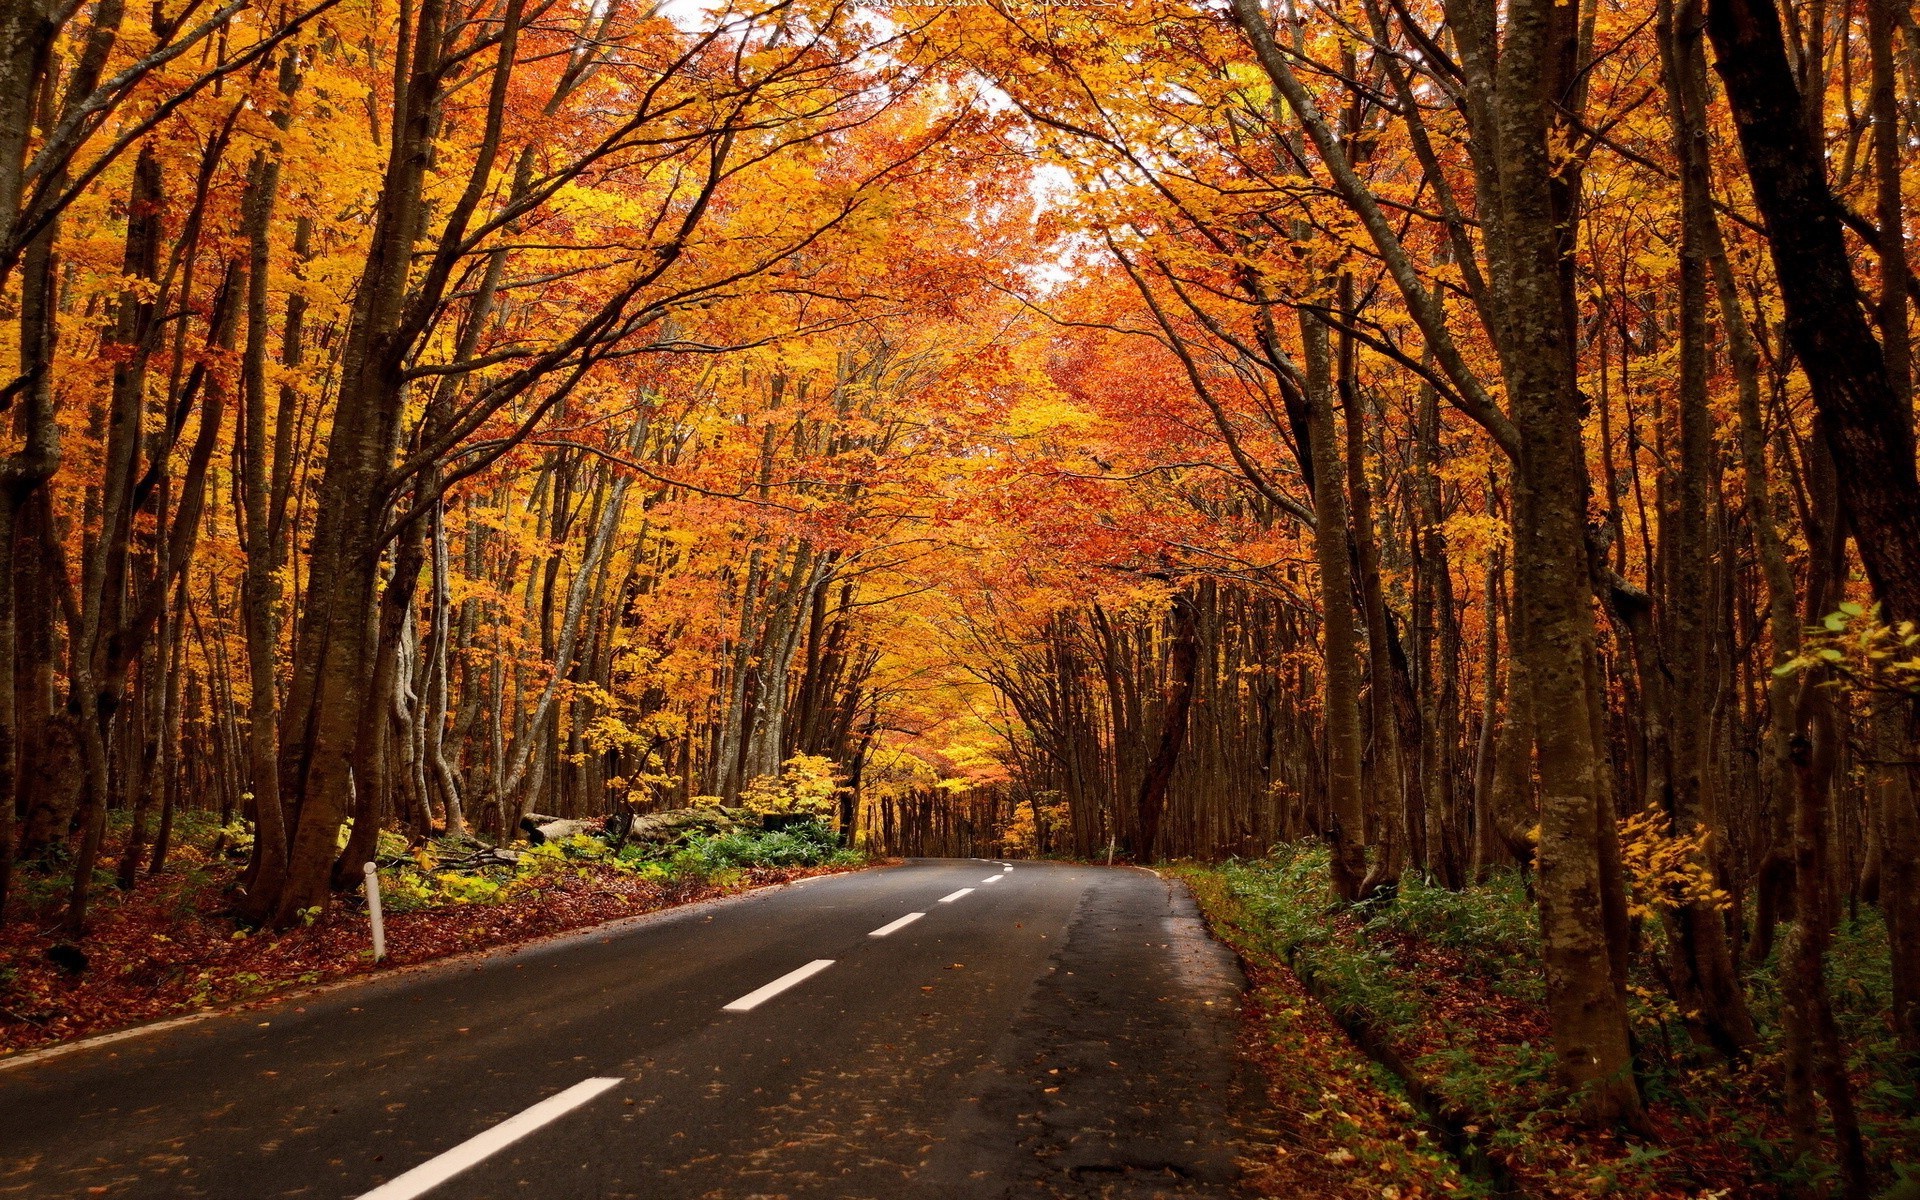 Free photo A road in an autumn forest with yellow leaves